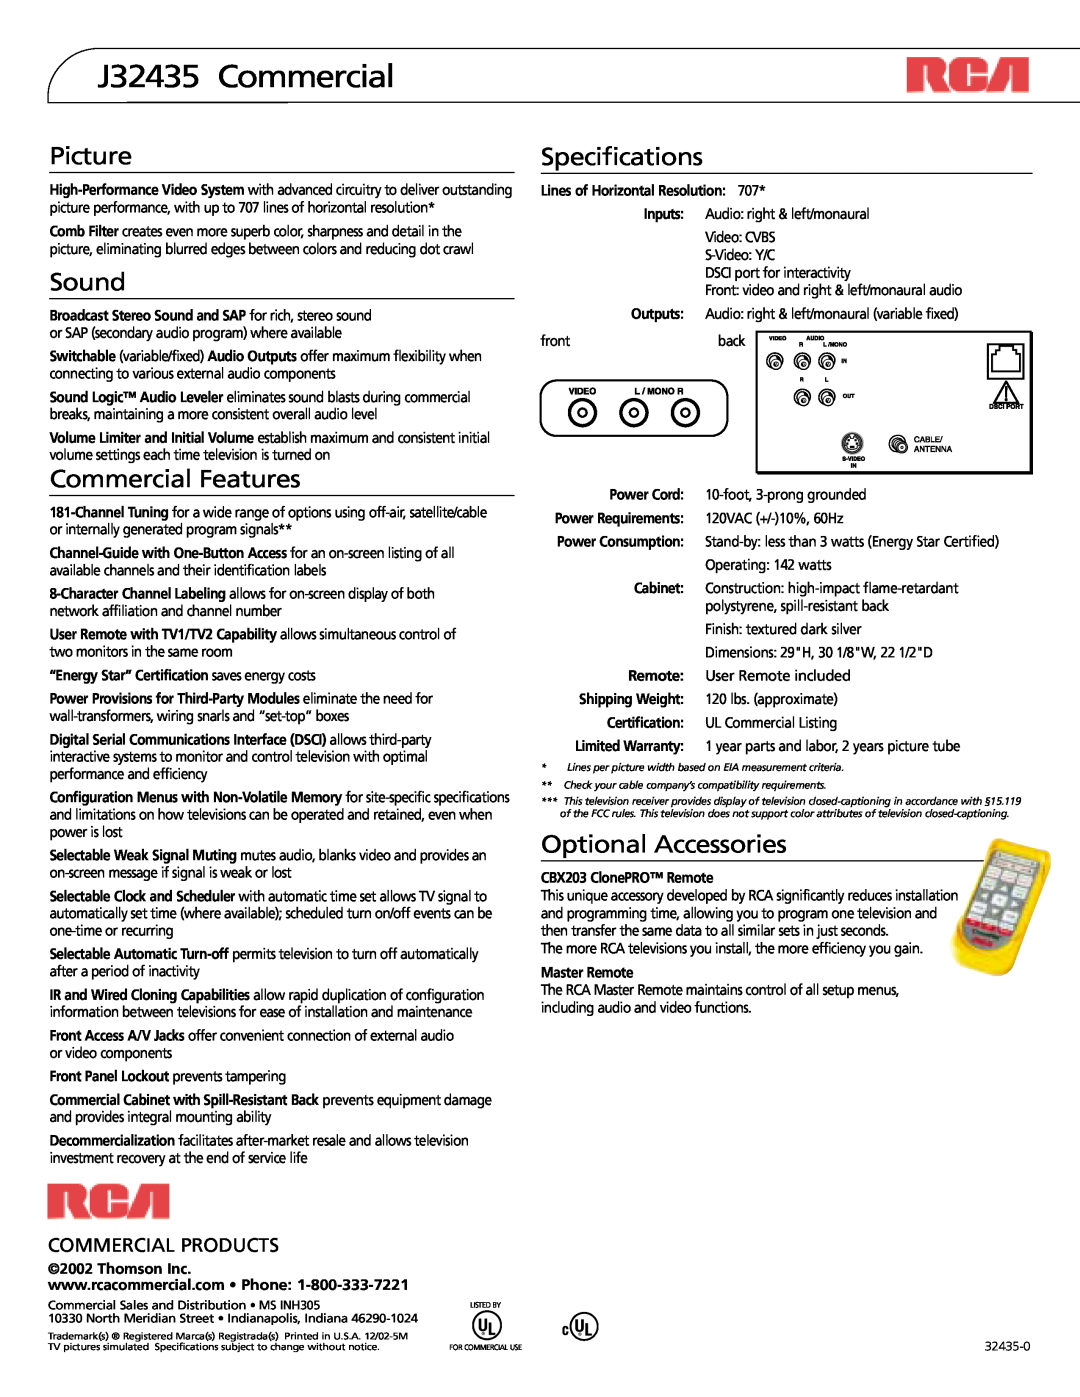 RCA J32435 Commercial, Picture, Sound, Commercial Features, Specifications, Optional Accessories, Commercial Products 